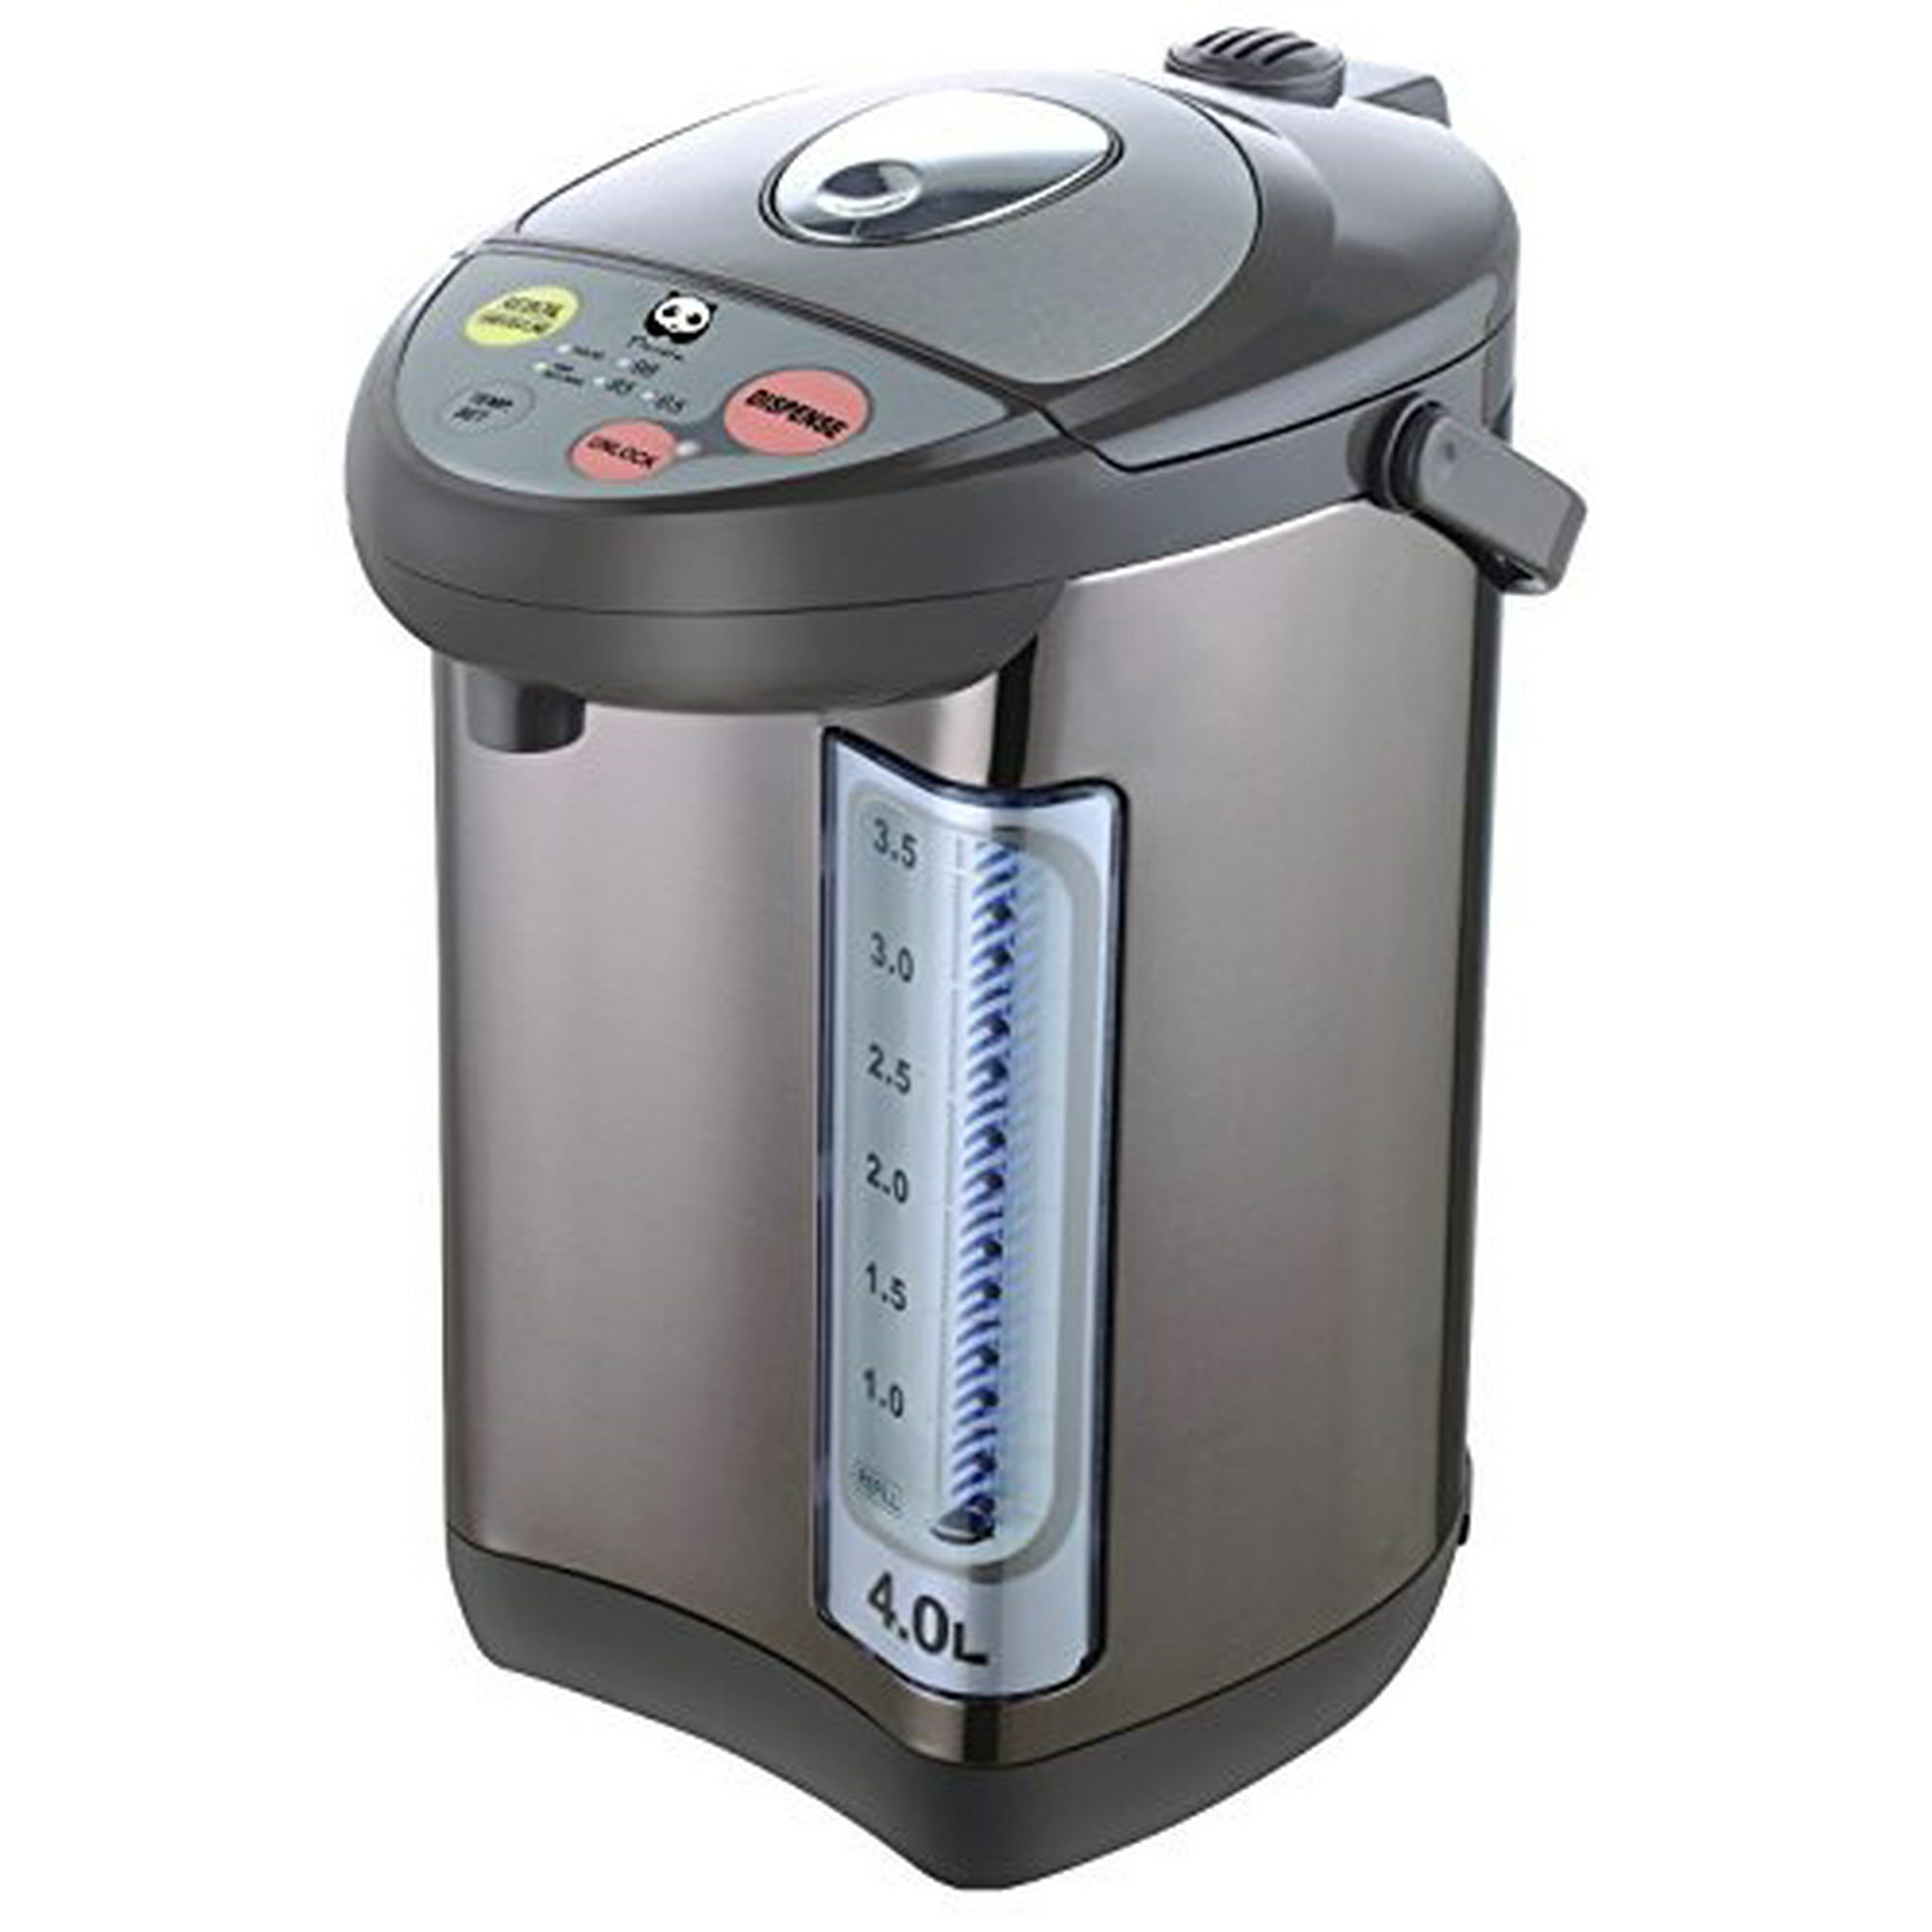 4.0 Liter Hot Water Dispenser, Rosewill Electric Hot Water Boiler and Warmer